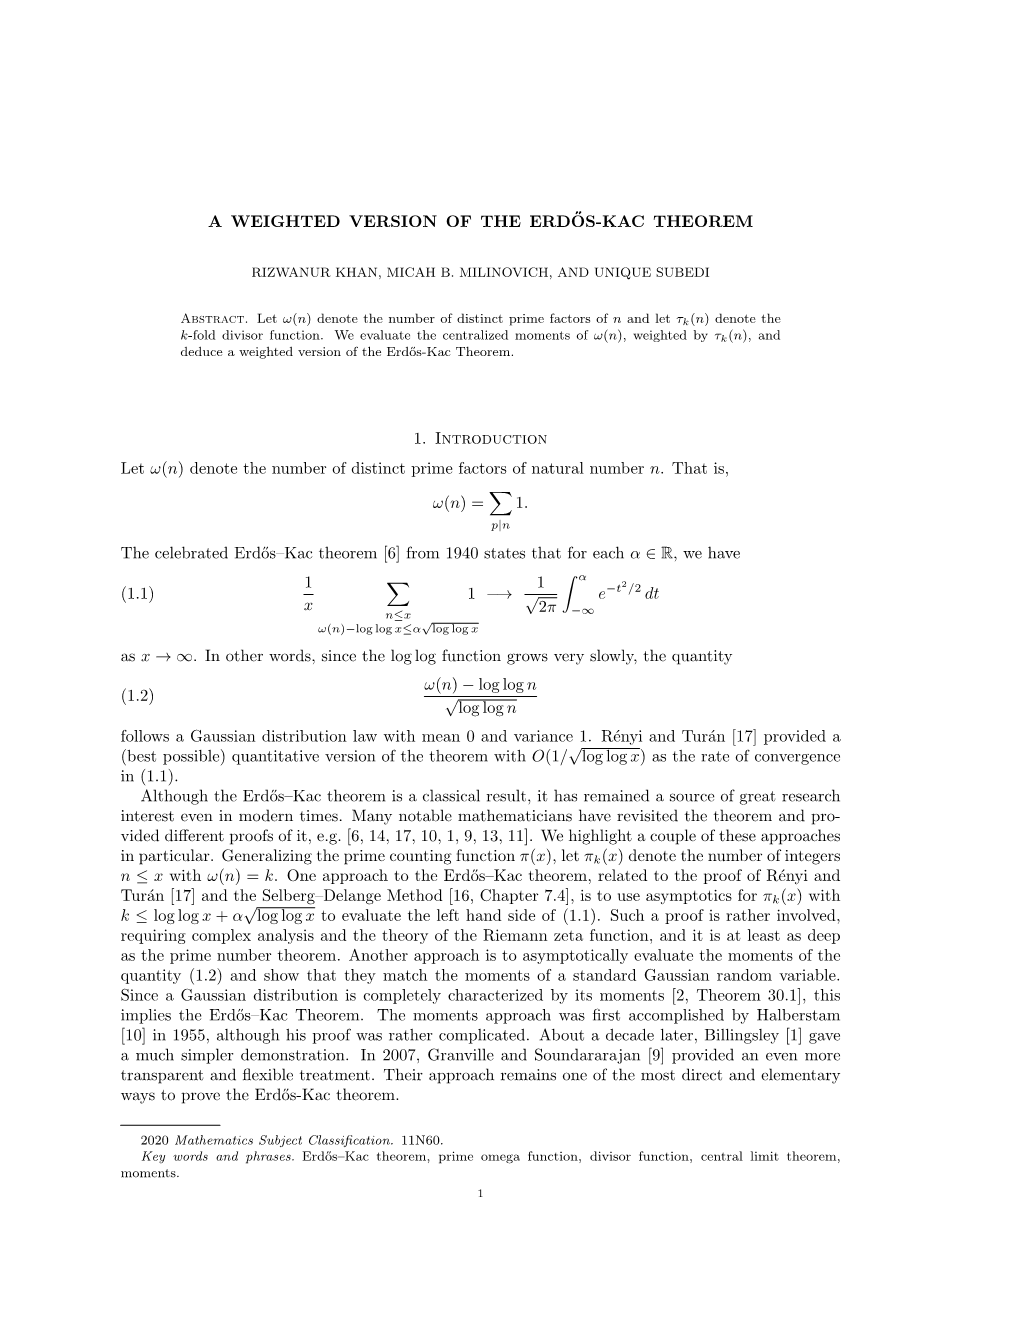 A Weighted Version of the Erdős-Kac Theorem